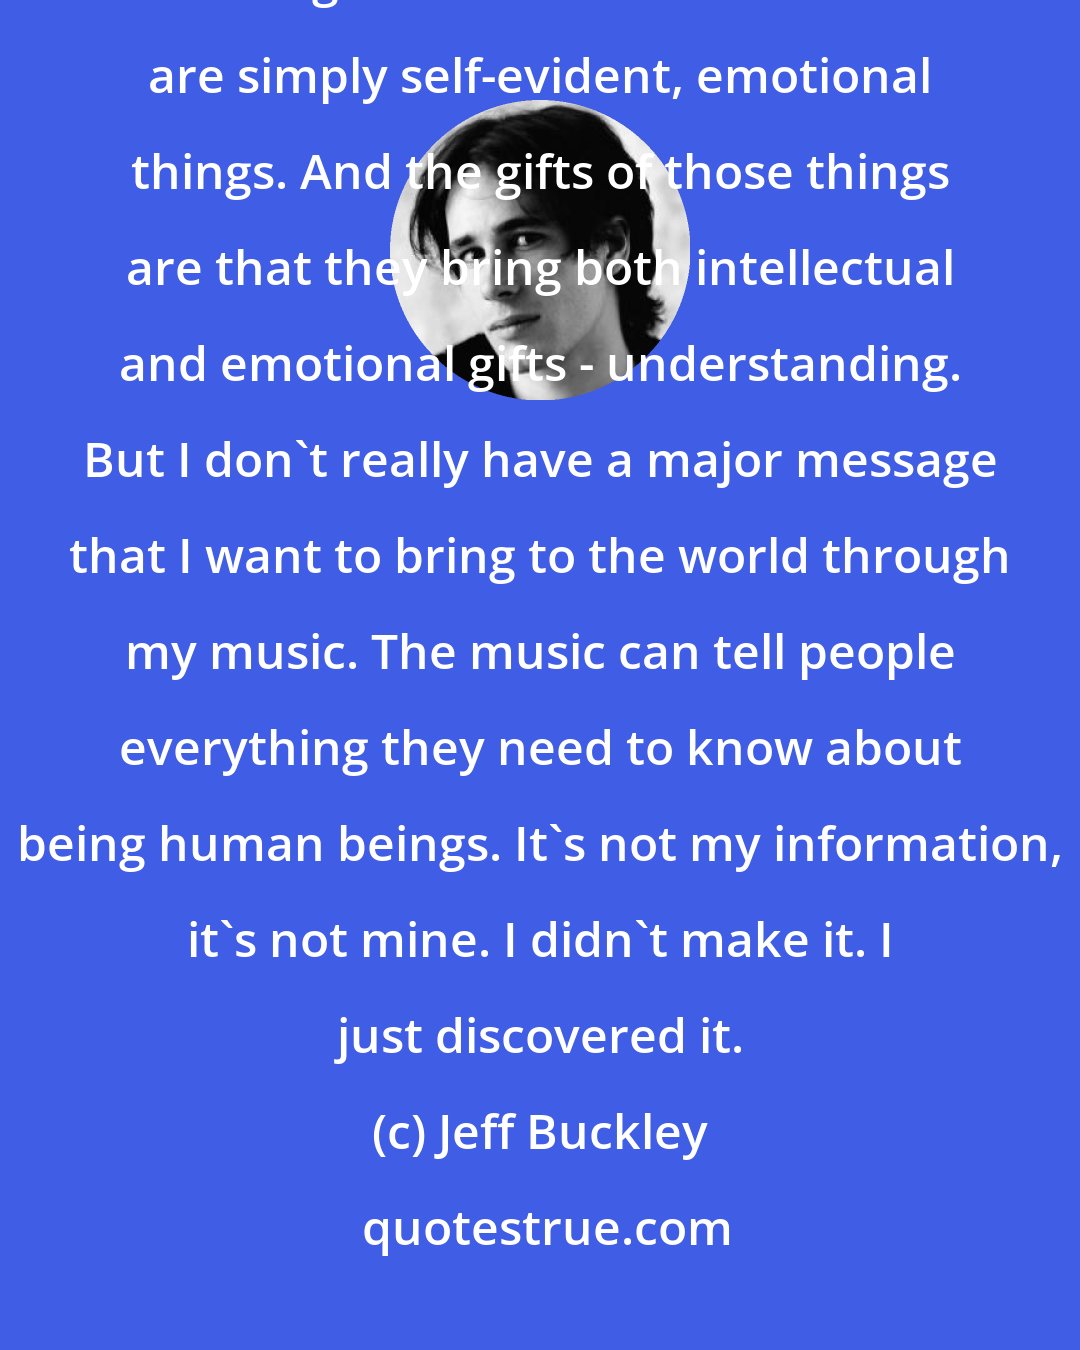 Jeff Buckley: [What I want to communicate] doesn't have a language with which I can communicate it. The things that I want to communicate are simply self-evident, emotional things. And the gifts of those things are that they bring both intellectual and emotional gifts - understanding. But I don't really have a major message that I want to bring to the world through my music. The music can tell people everything they need to know about being human beings. It's not my information, it's not mine. I didn't make it. I just discovered it.